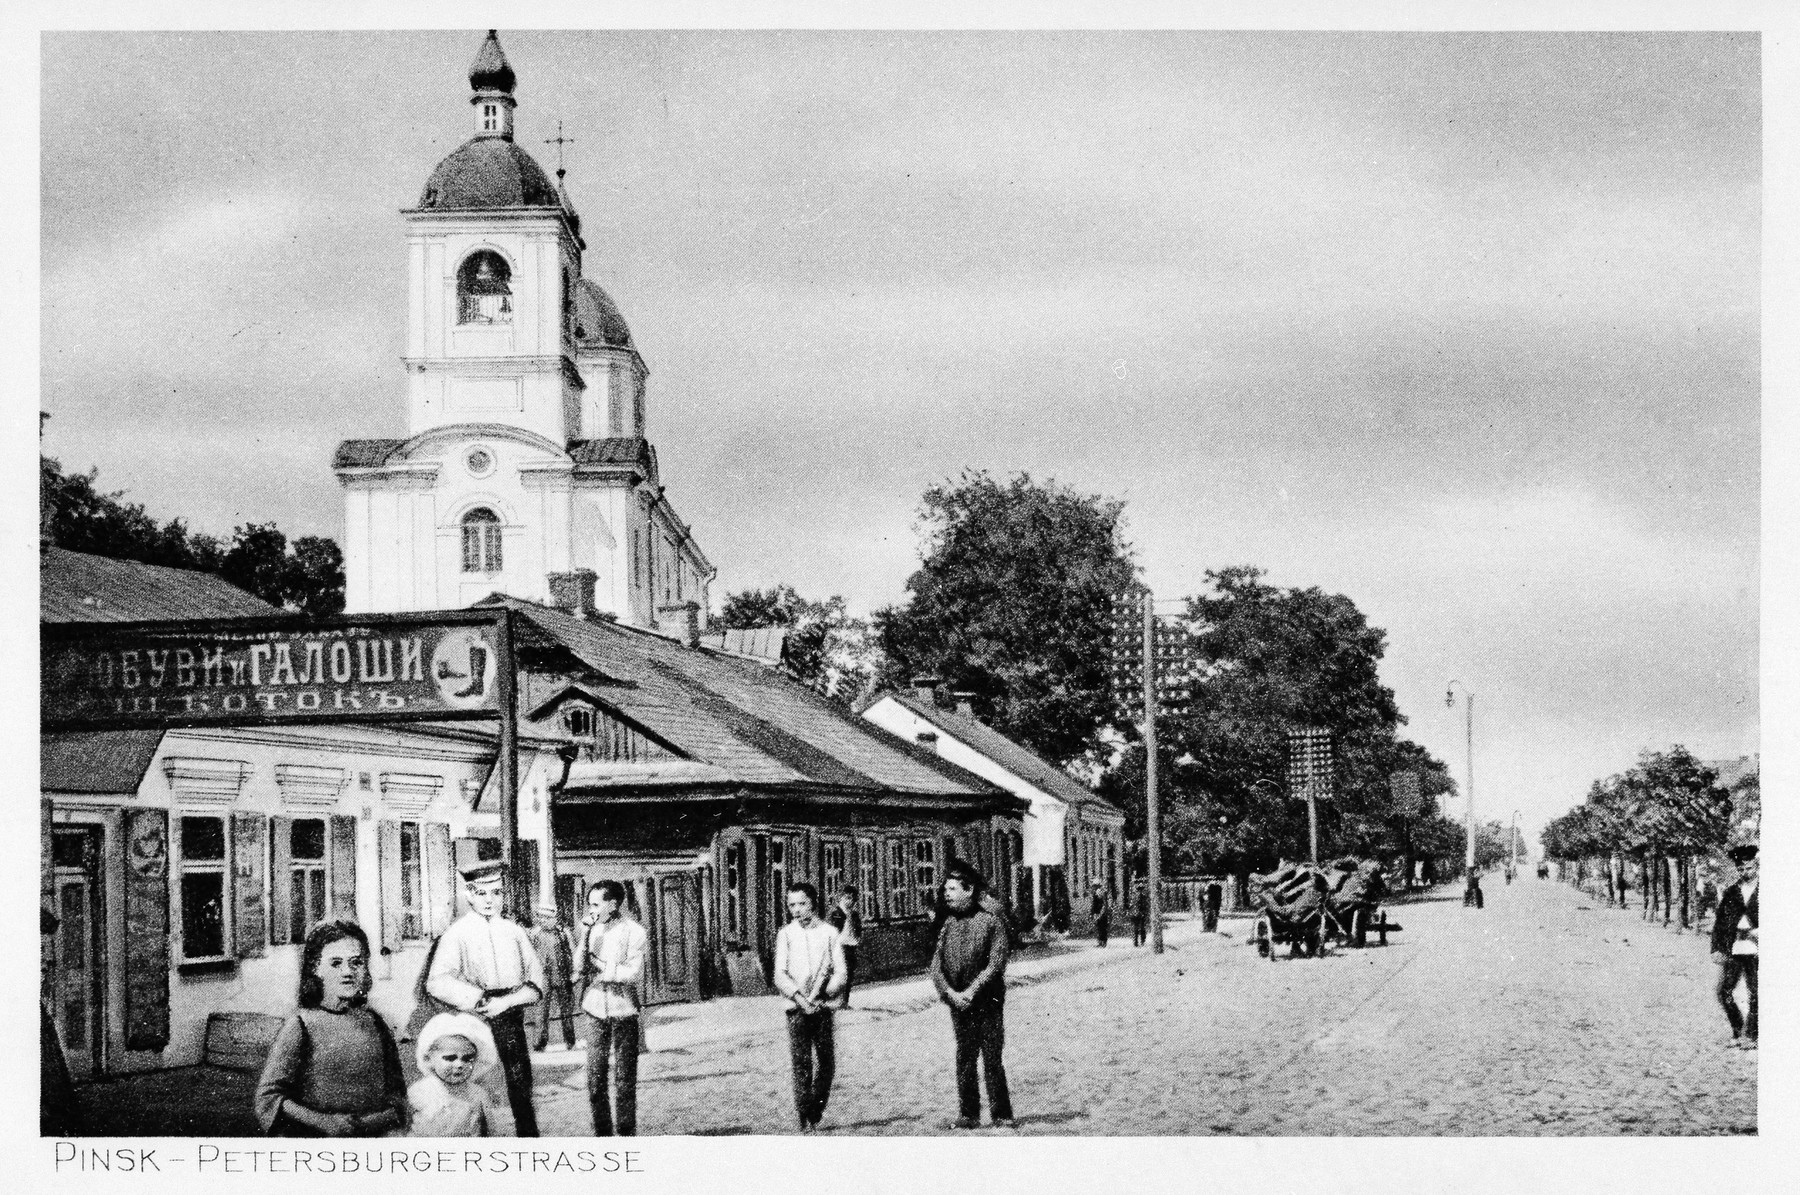 View of a street in prewar Pinsk with signs in Russian.

The original German caption reads "Pinsk -- Petersburgerstrasse".